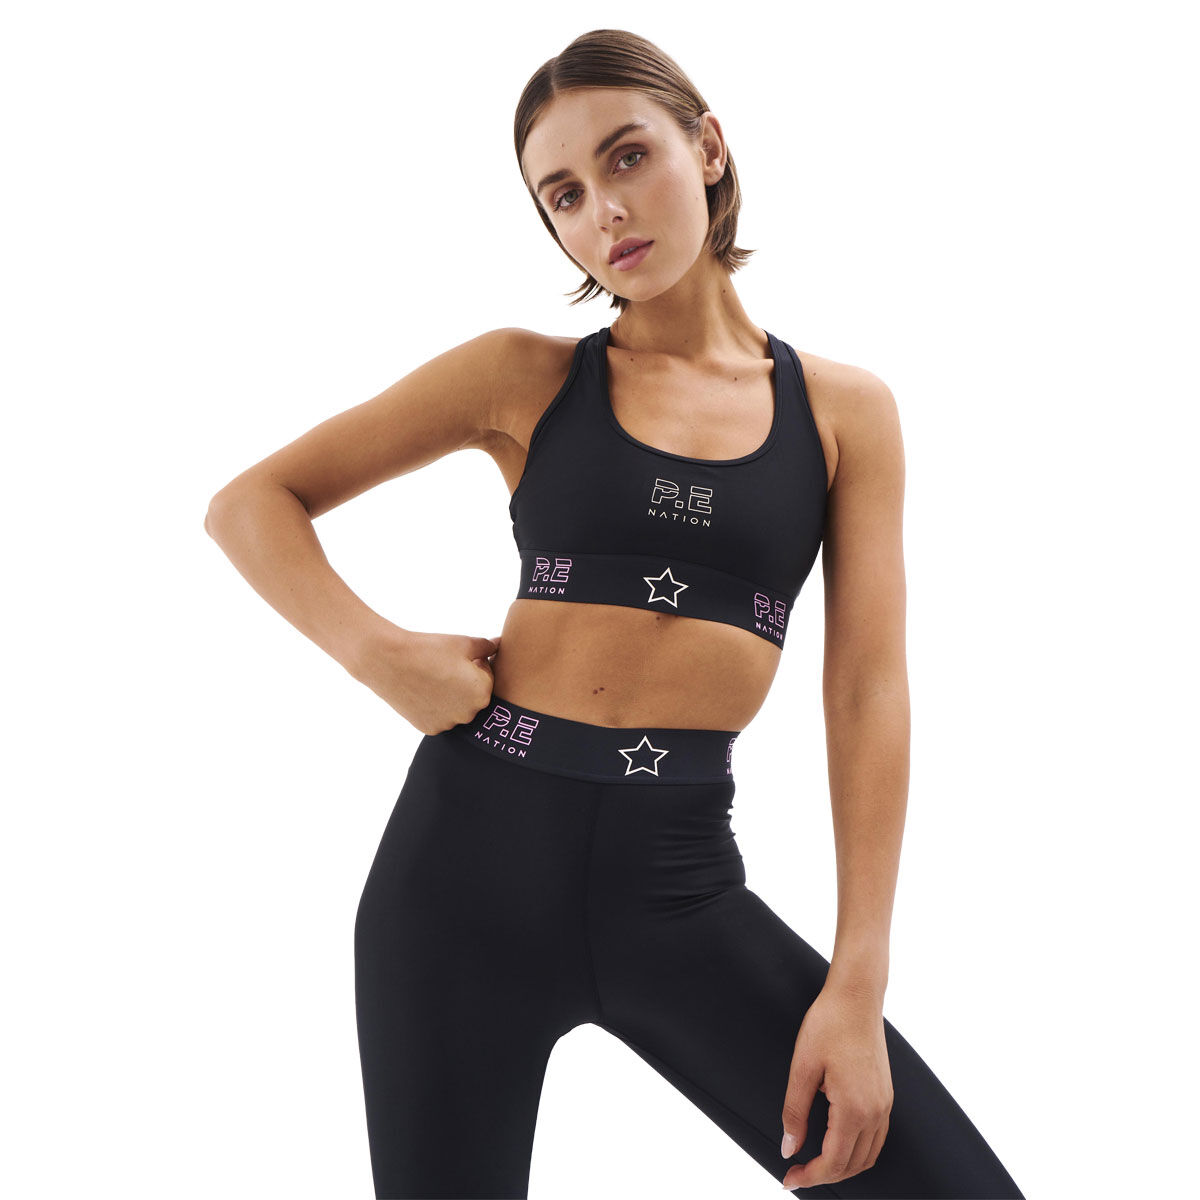 Lorna Jane Sports Bras Stores Vancouver - Up To 50% OFF Now